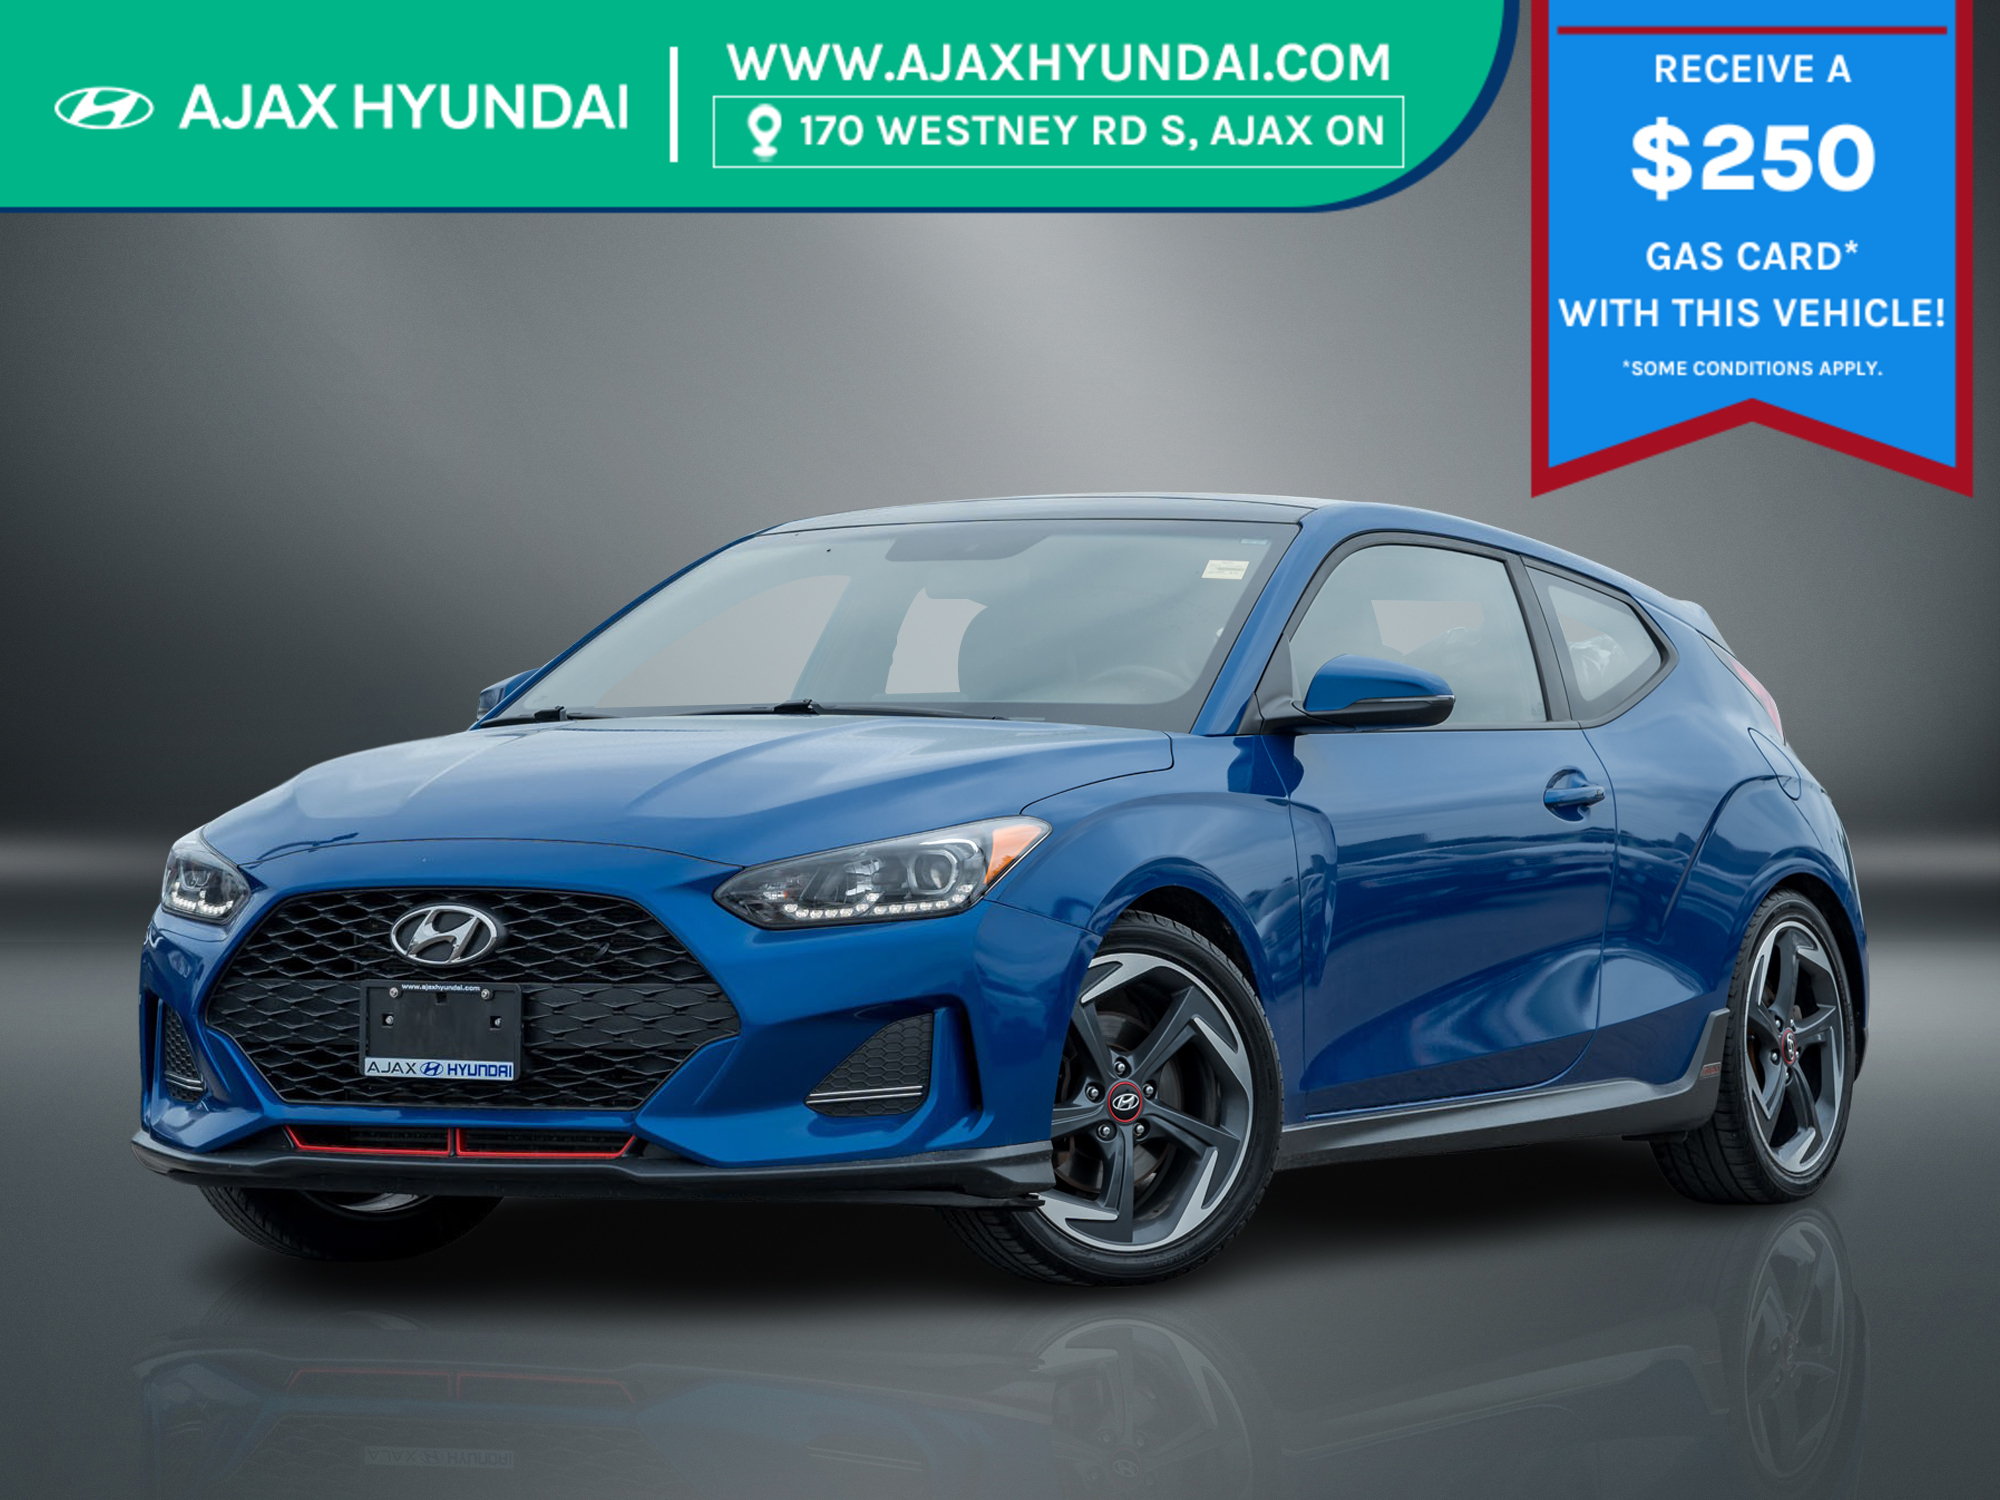 2019 Hyundai Veloster Turbo NO ACCIDENT | RATES FROM 4.99%